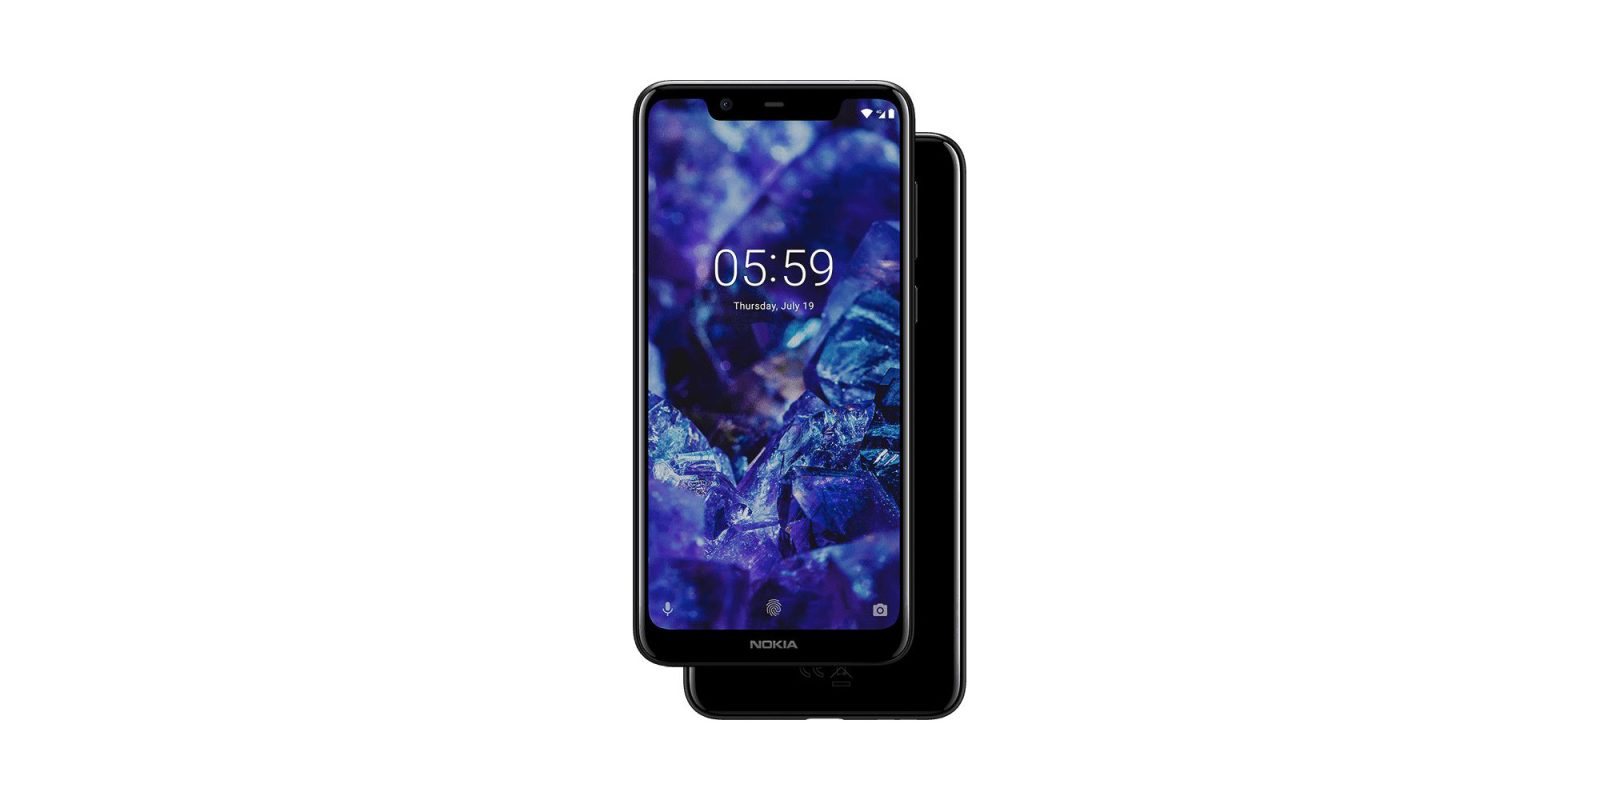 Nokia's Android Pie rollout continues this week with the mid-range Nokia 5.1 Plus